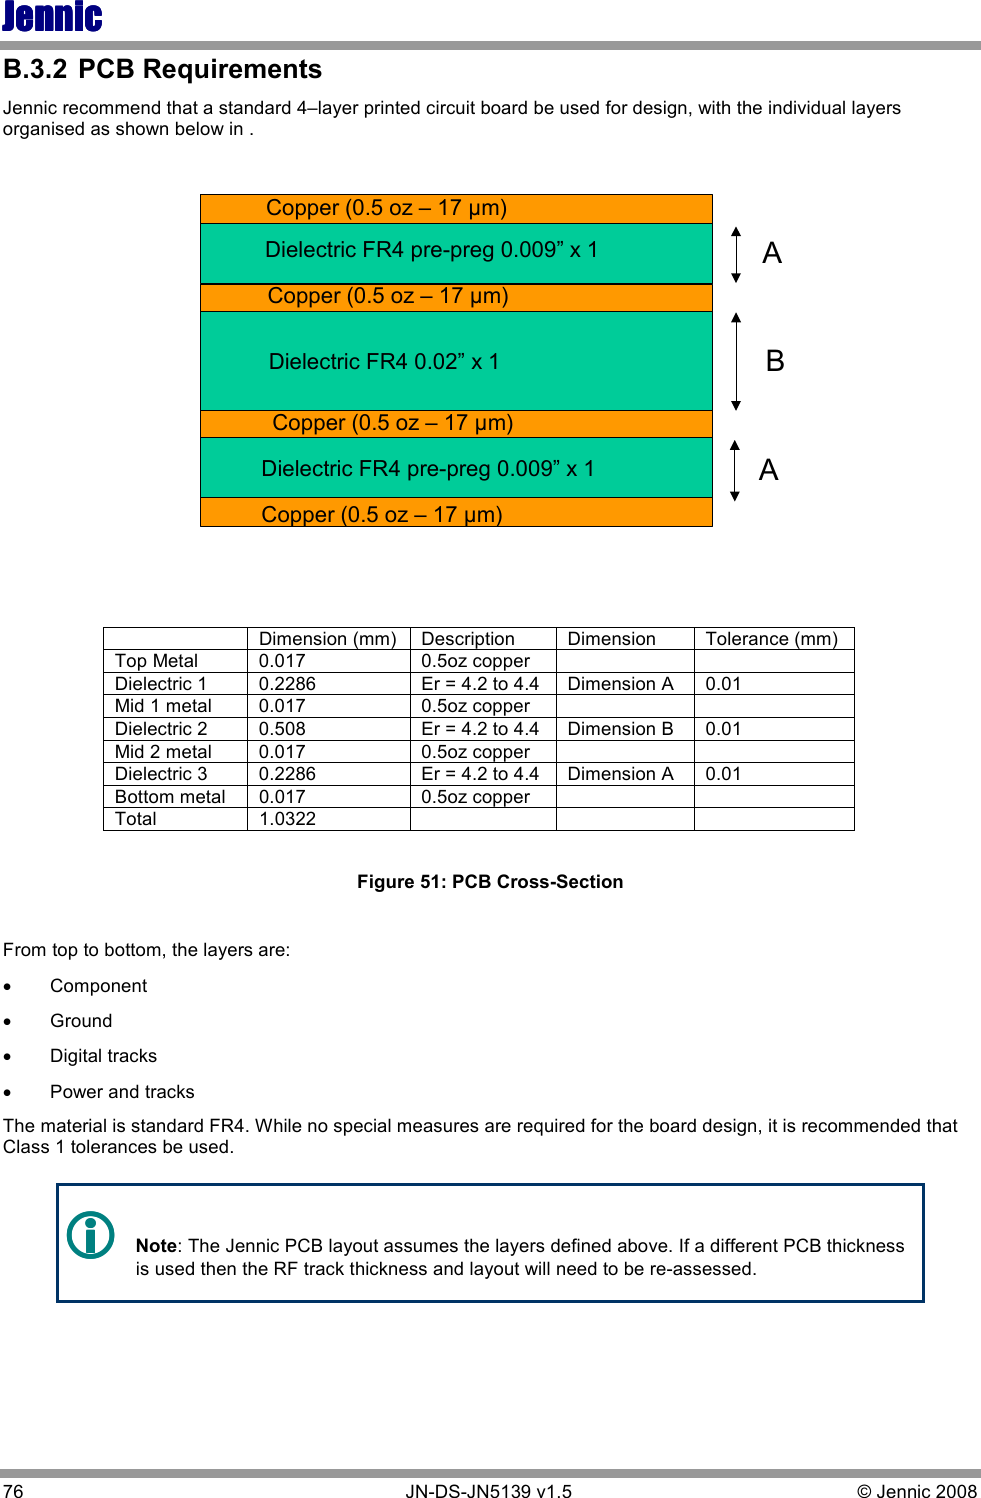 JennicJennicJennicJennic 76        JN-DS-JN5139 v1.5  © Jennic 2008  B.3.2  PCB Requirements Jennic recommend that a standard 4–layer printed circuit board be used for design, with the individual layers organised as shown below in . Copper (0.5 oz – 17 µm)Copper (0.5 oz – 17 µm)Copper (0.5 oz – 17 µm)Copper (0.5 oz – 17 µm)ABADielectric FR4 pre-preg 0.009” x 1Dielectric FR4 0.02” x 1Dielectric FR4 pre-preg 0.009” x 1     Dimension (mm)  Description  Dimension  Tolerance (mm) Top Metal  0.017  0.5oz copper     Dielectric 1  0.2286  Er = 4.2 to 4.4  Dimension A  0.01 Mid 1 metal  0.017  0.5oz copper     Dielectric 2  0.508  Er = 4.2 to 4.4  Dimension B  0.01 Mid 2 metal  0.017  0.5oz copper     Dielectric 3  0.2286  Er = 4.2 to 4.4  Dimension A  0.01 Bottom metal  0.017  0.5oz copper     Total  1.0322        Figure 51: PCB Cross-Section  From top to bottom, the layers are:  • Component • Ground • Digital tracks • Power and tracks The material is standard FR4. While no special measures are required for the board design, it is recommended that Class 1 tolerances be used.       Note: The Jennic PCB layout assumes the layers defined above. If a different PCB thickness is used then the RF track thickness and layout will need to be re-assessed.   